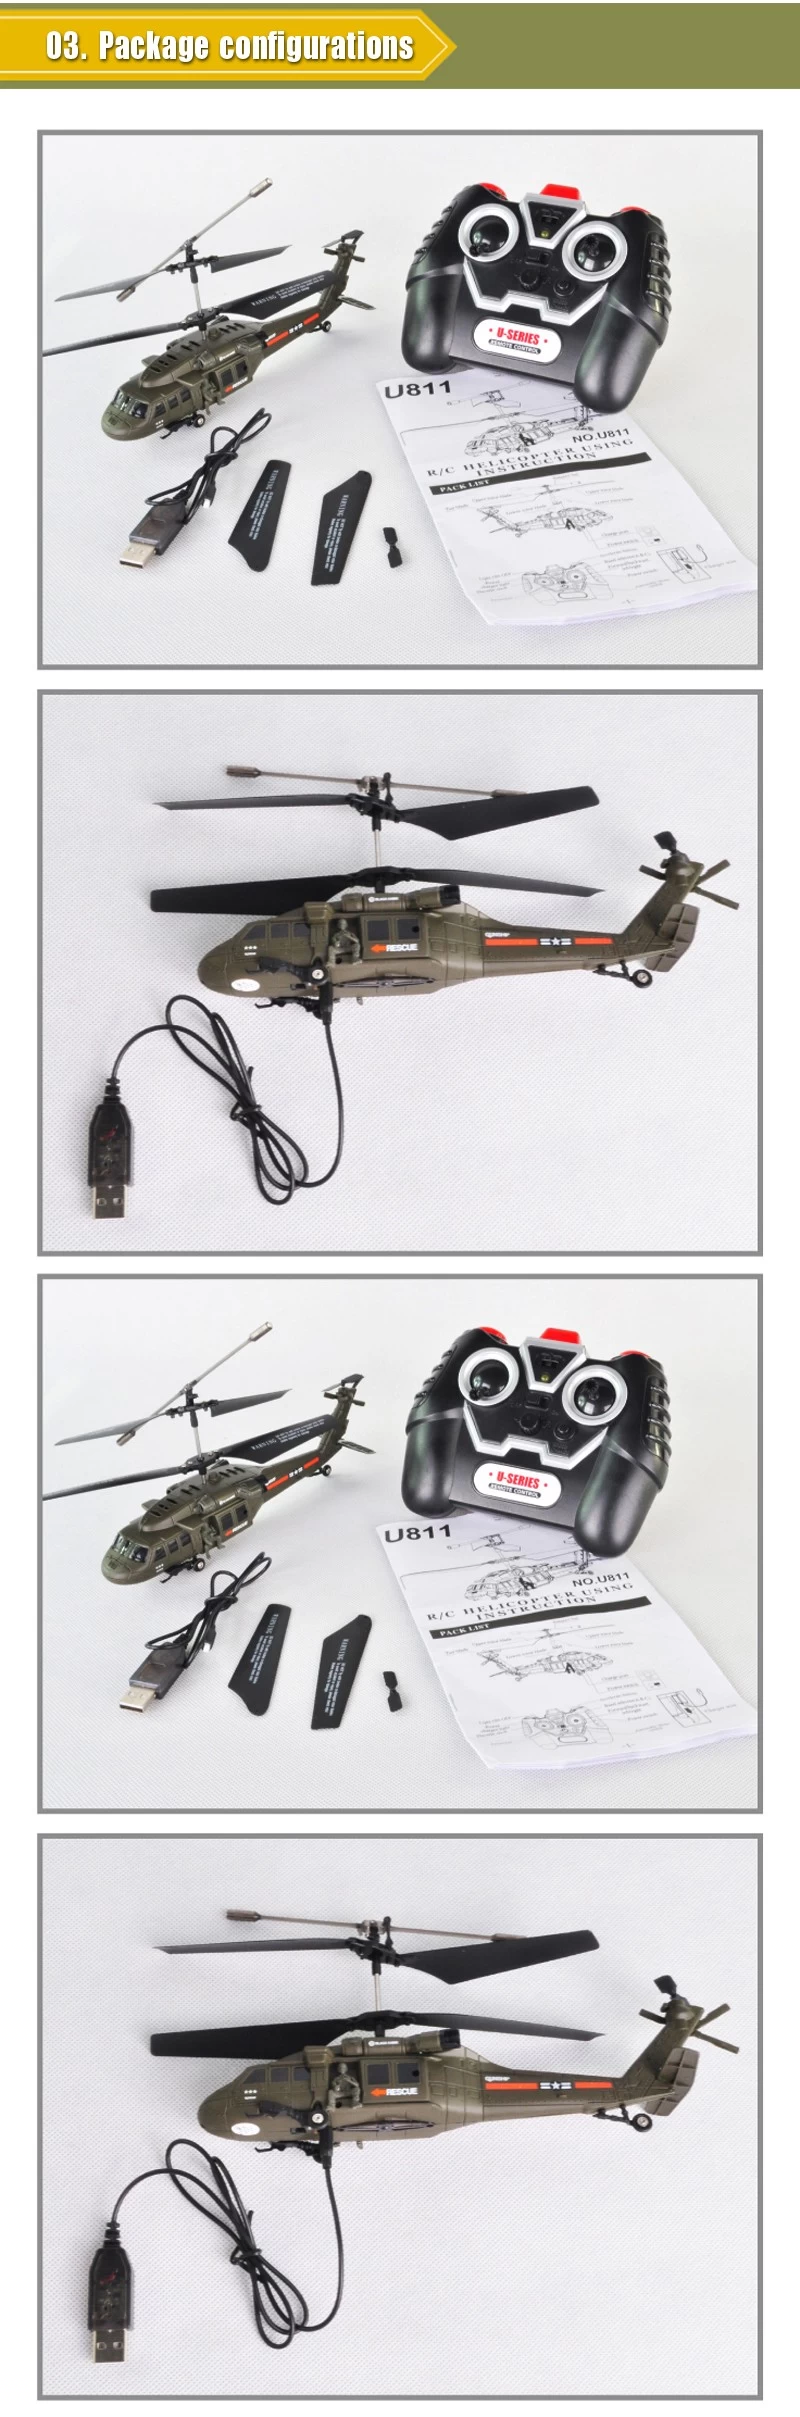 helicopter drone,3.5 channel rc helicopter,r/c helicopter,helicopter toys